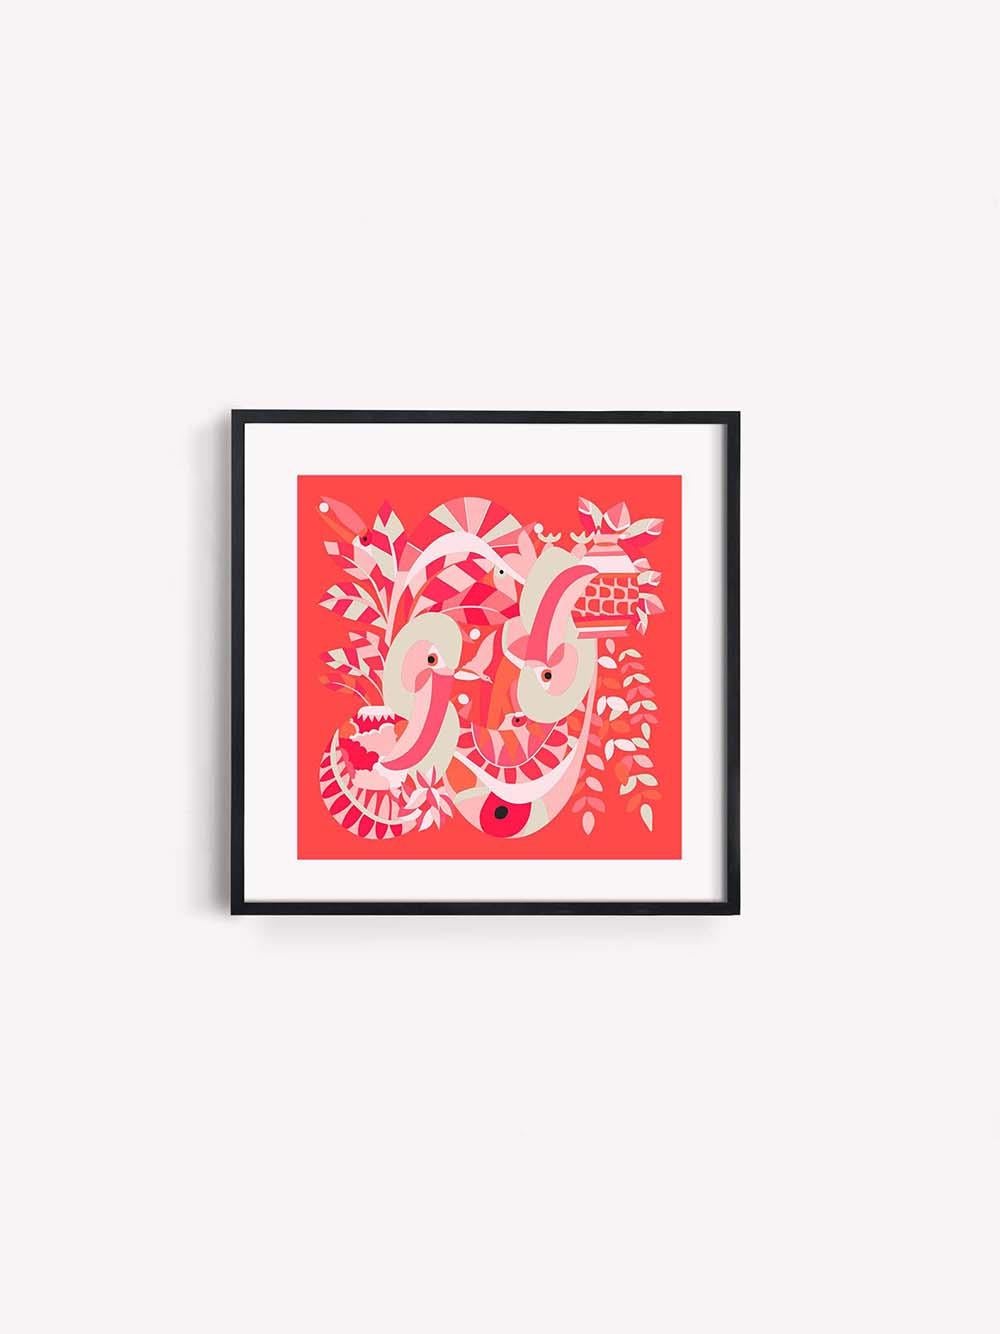 Limited edition of Oeil de Toucan art print. Each copy is numbered, signed by the artist's hand and delivered with a certificate of authenticity. 

Designed by Paloma Morand Monteil for Alto Duo. 
Bright, soft colors delicately highlight rounded,